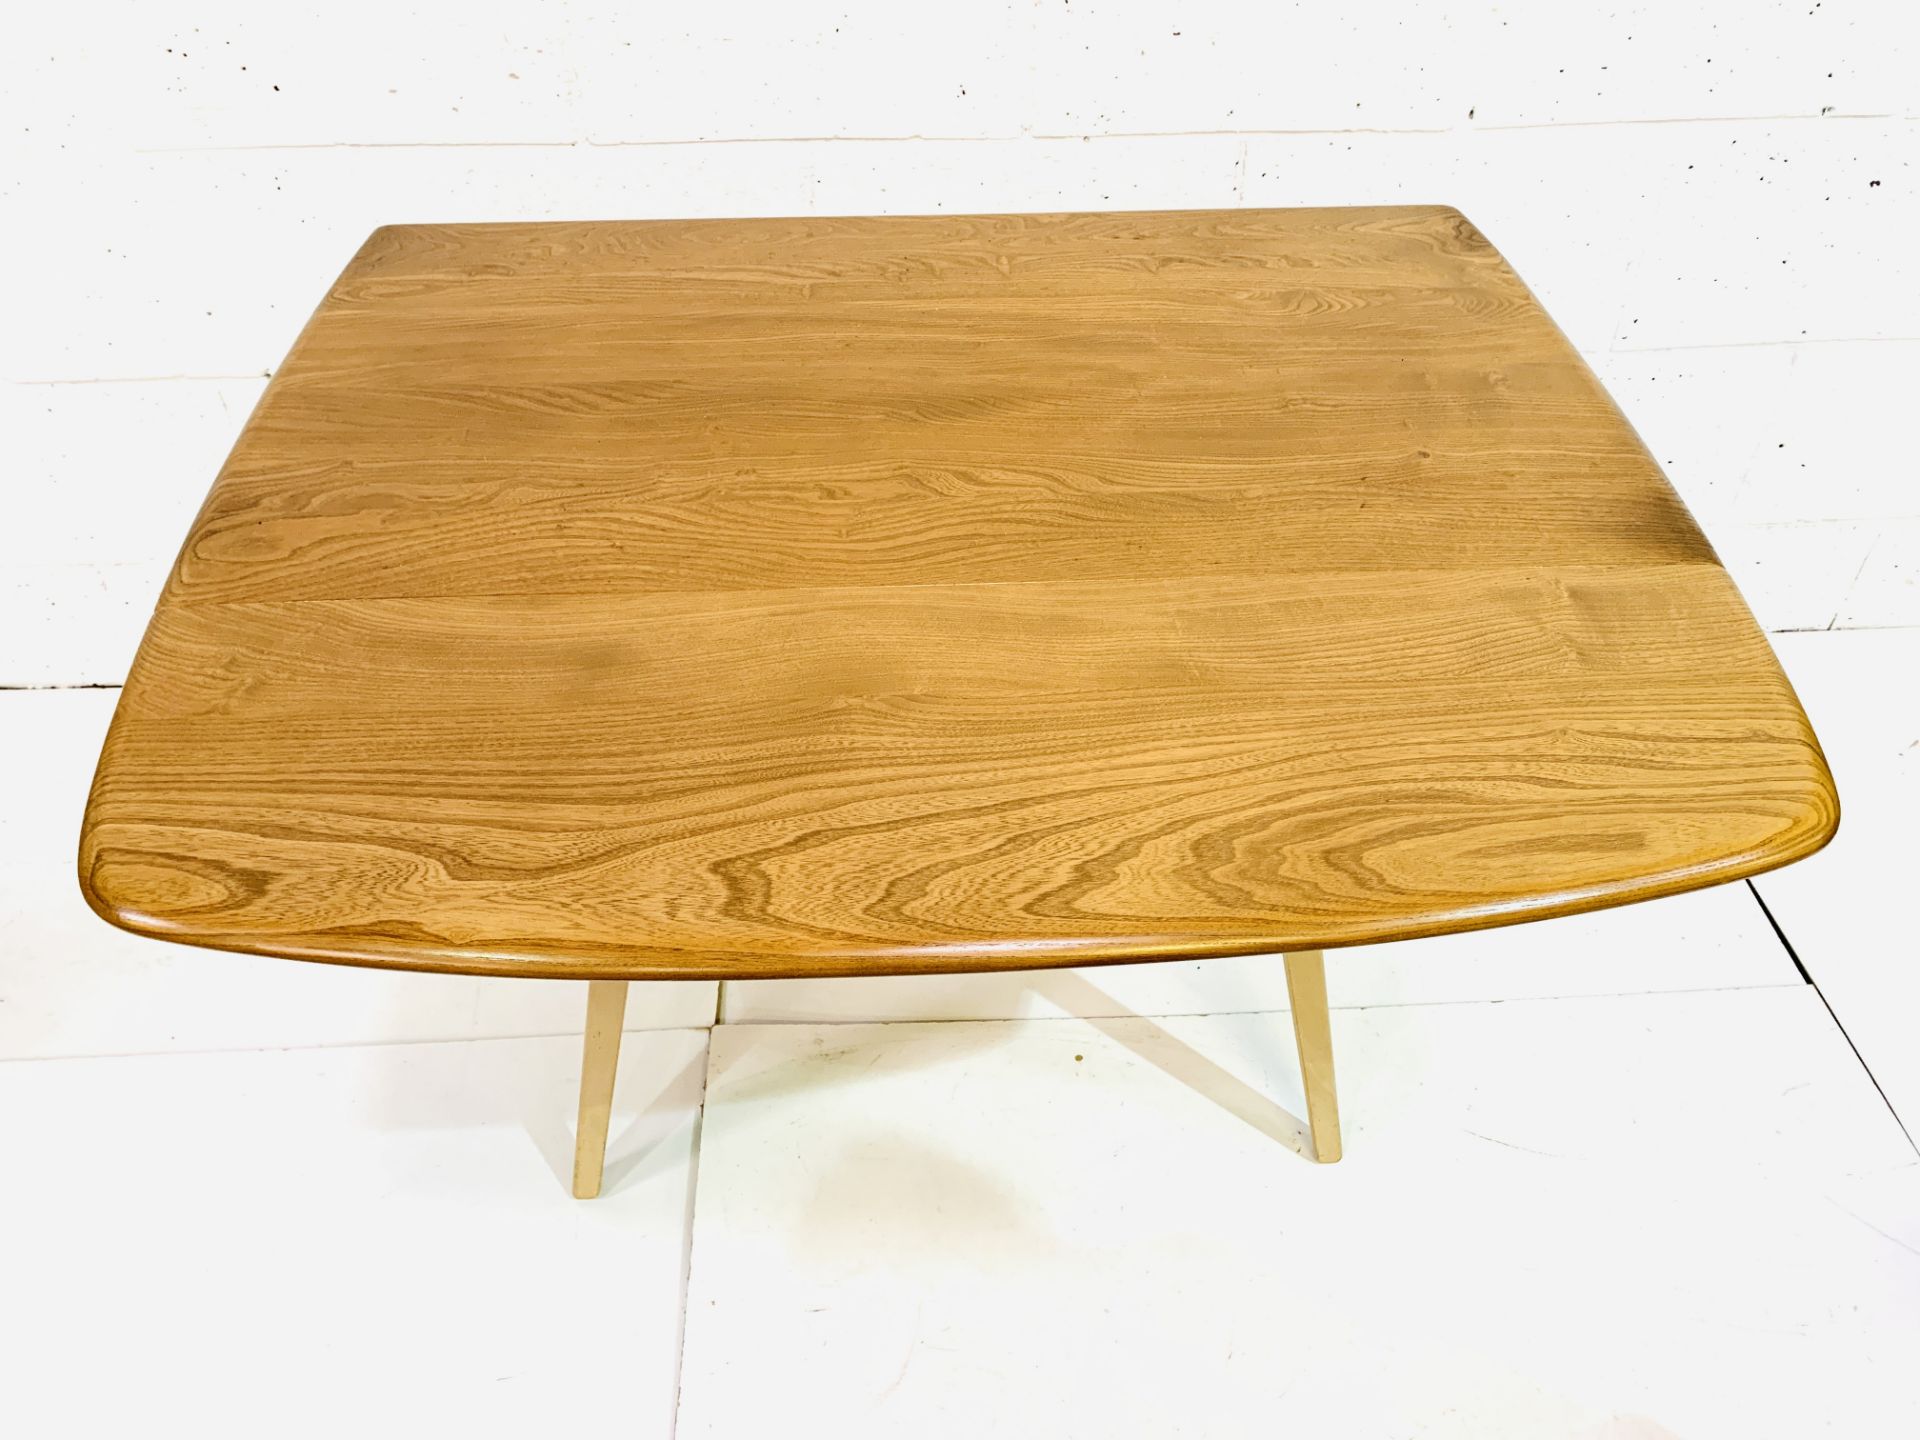 Ercol drop side dining table - Image 5 of 5